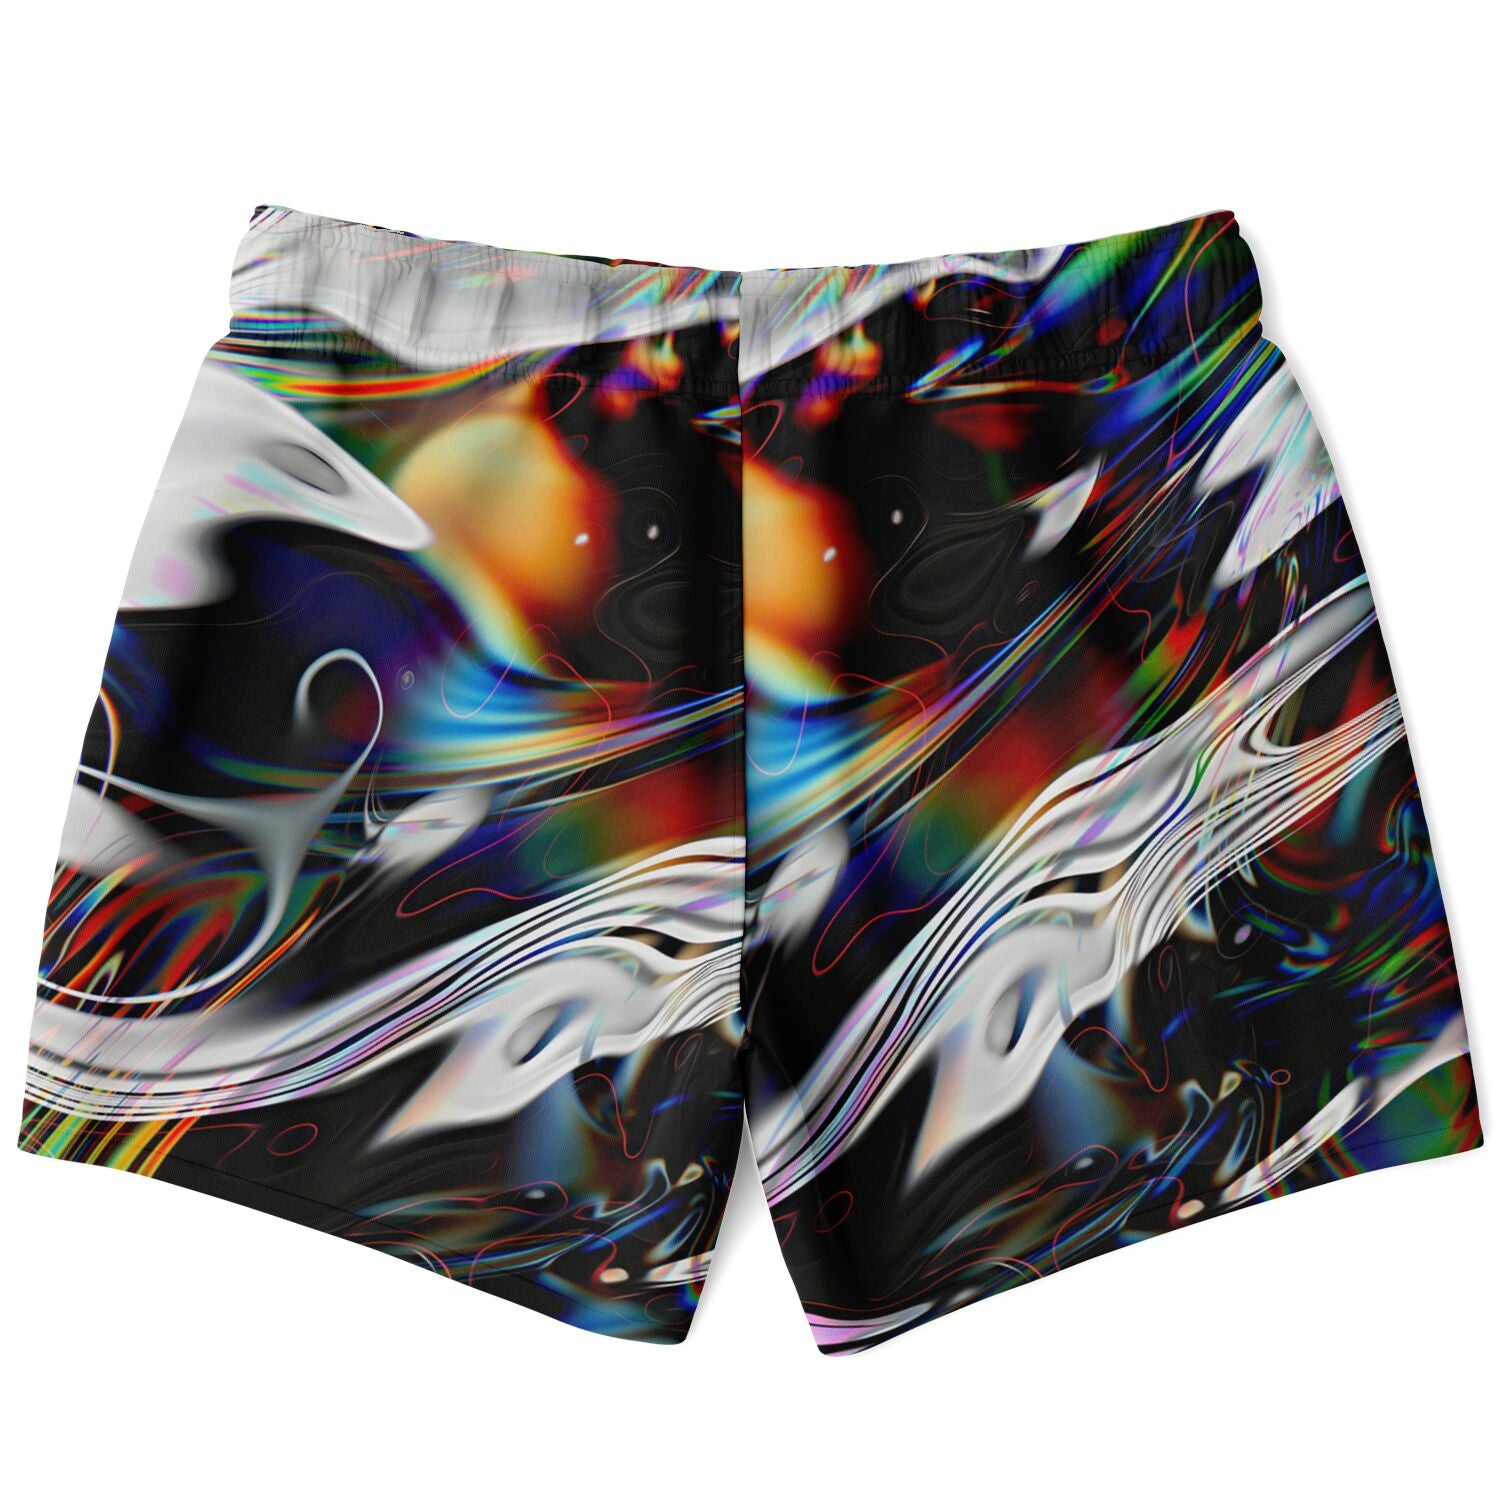 A pair of Glitch Swim Trunks with a colorful abstract design.